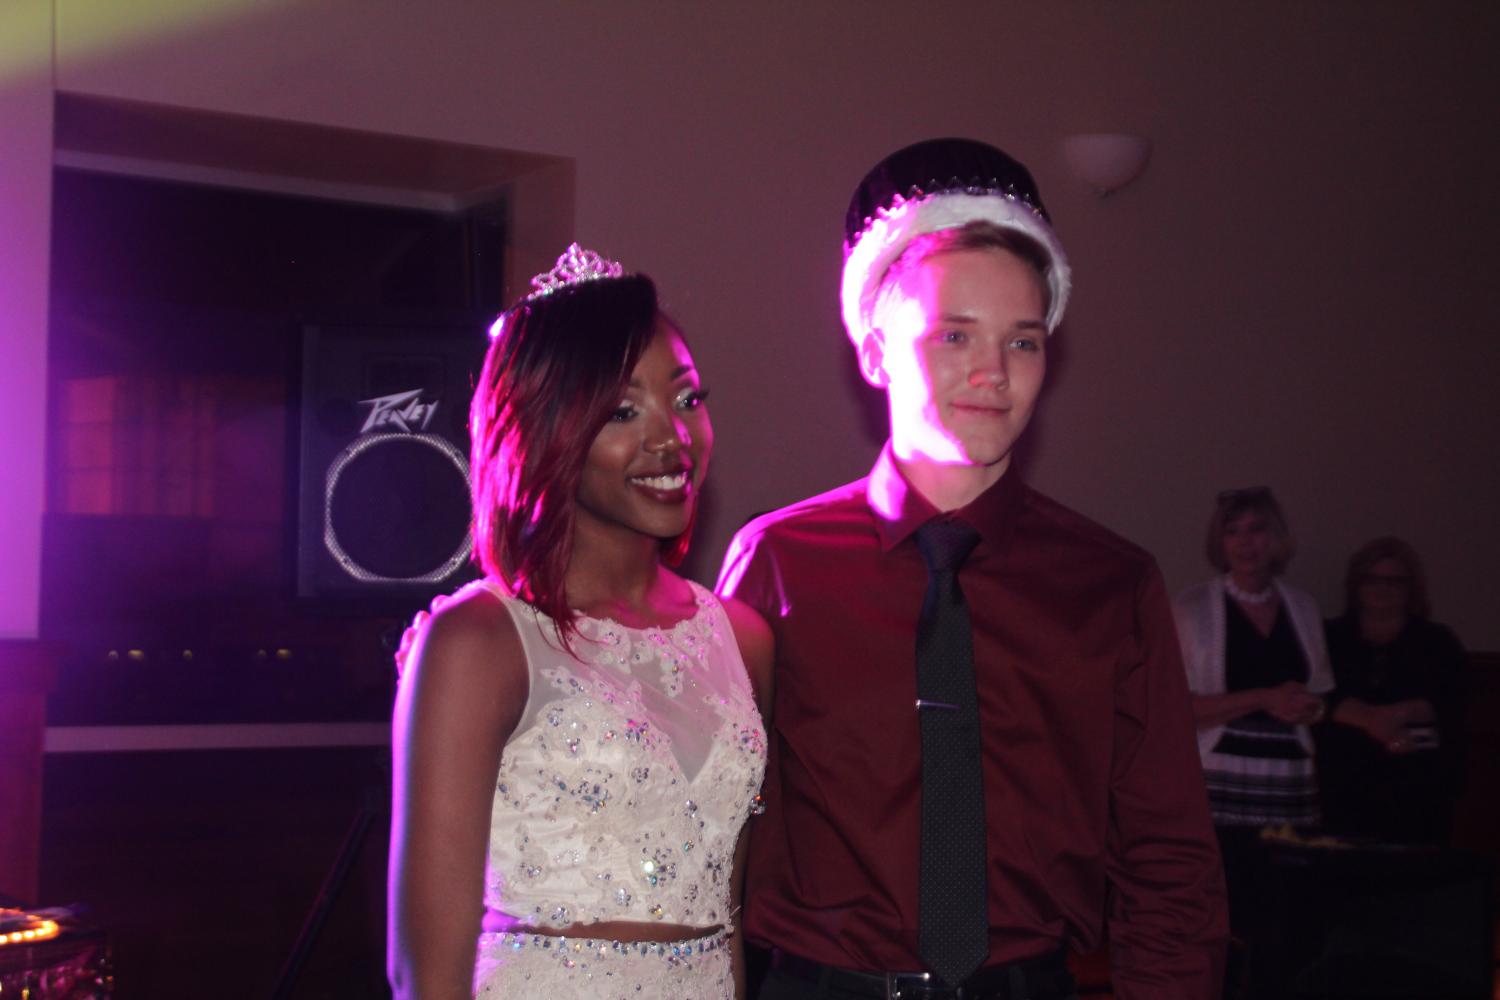 Prom queen and king: Janelle Hill (queen, left), Caleb Ostermann (king, right)